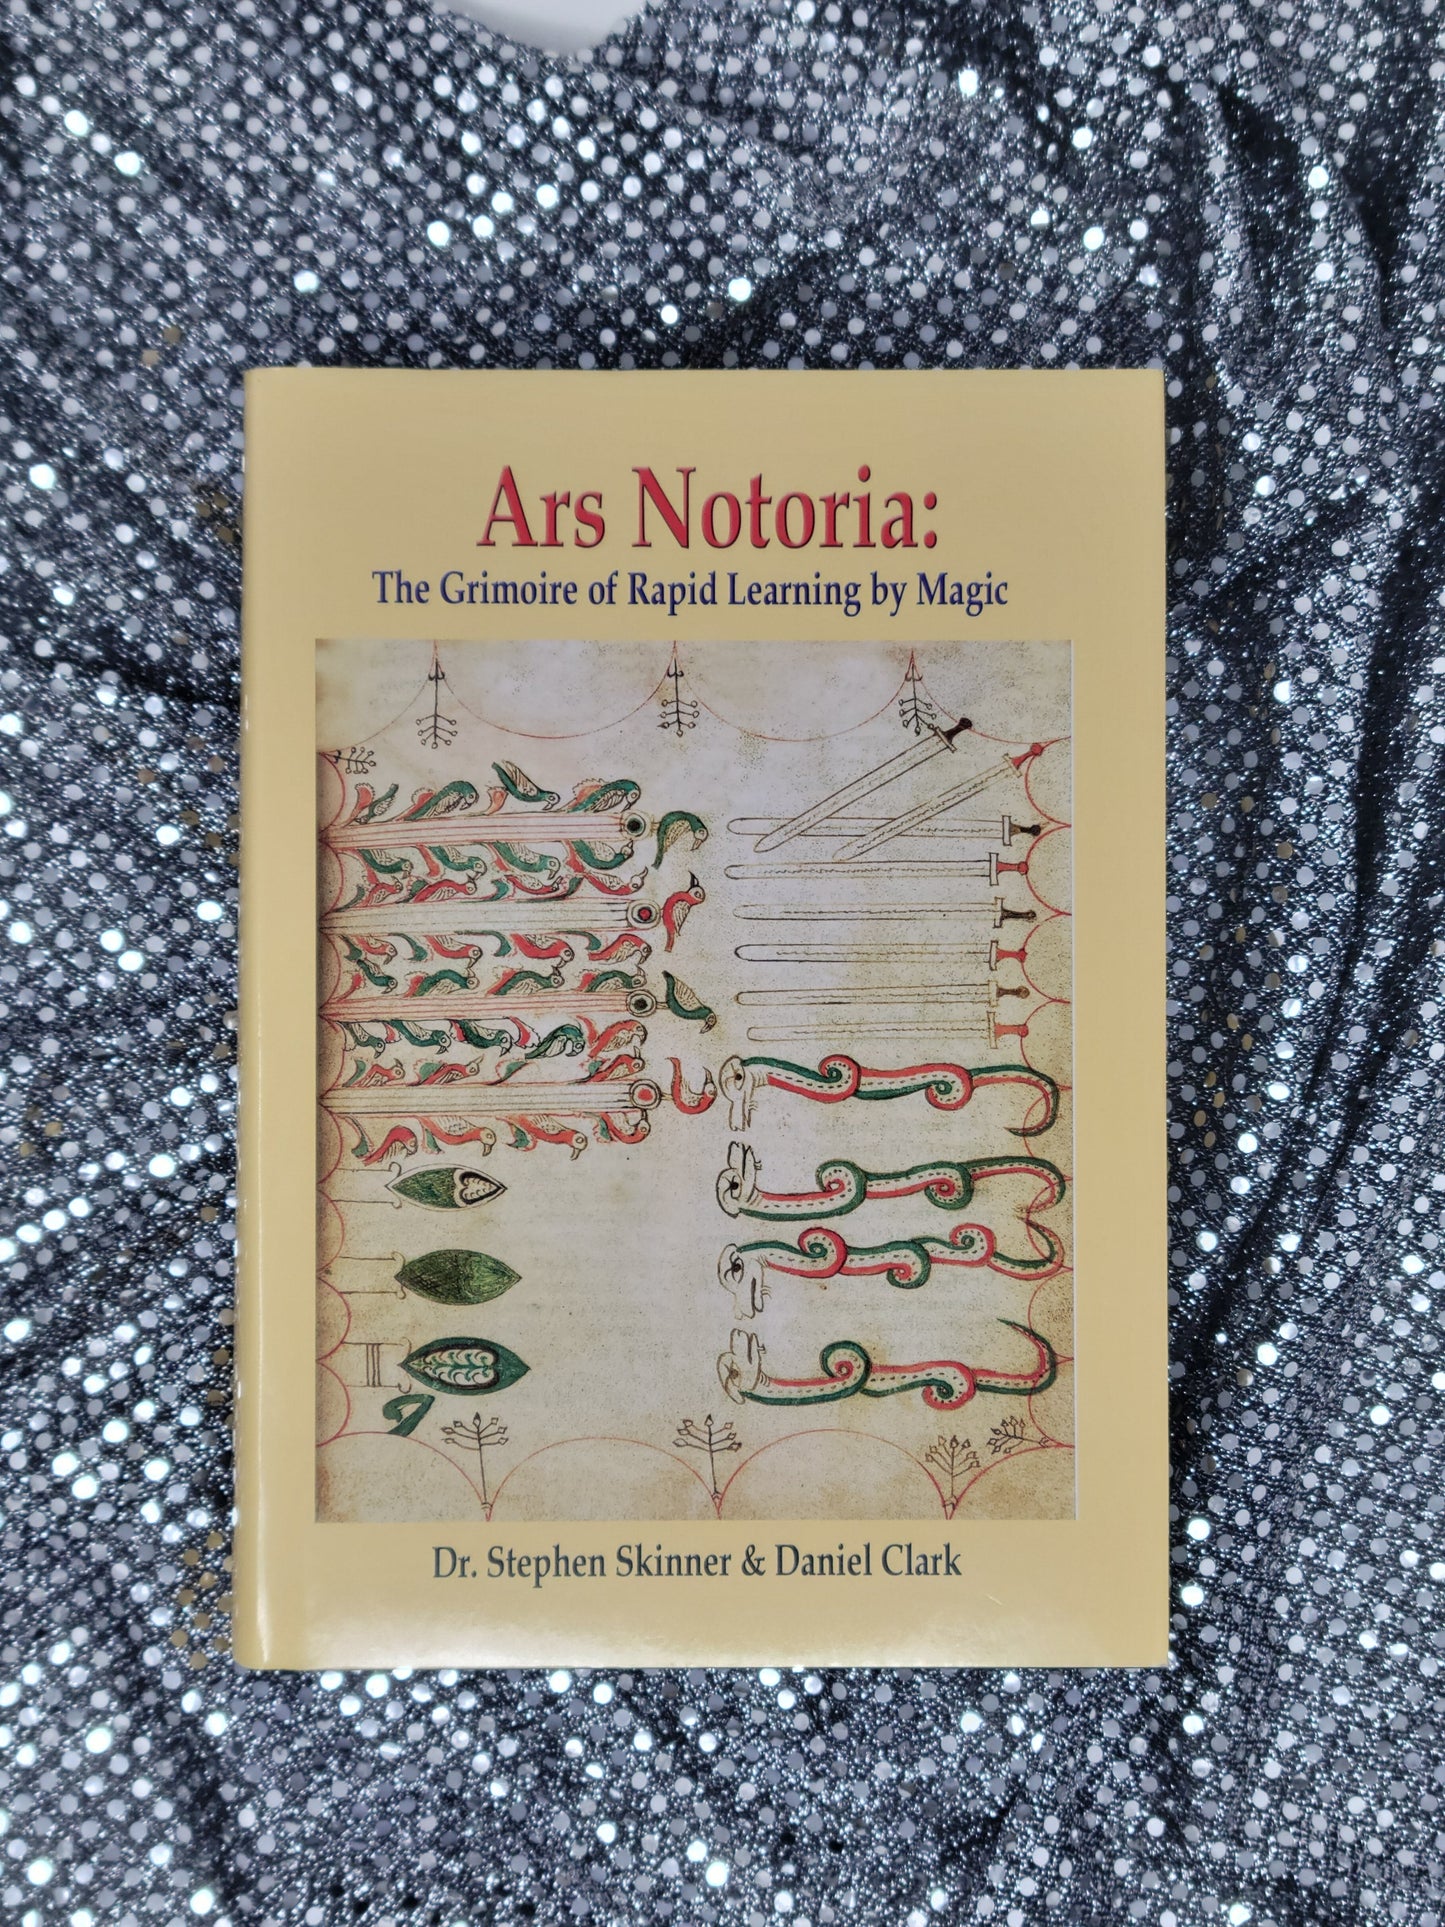 Ars Notoria: The Grimoire of Rapid Learning by Magic - Dr. Stephen Skinner & Daniel Clark